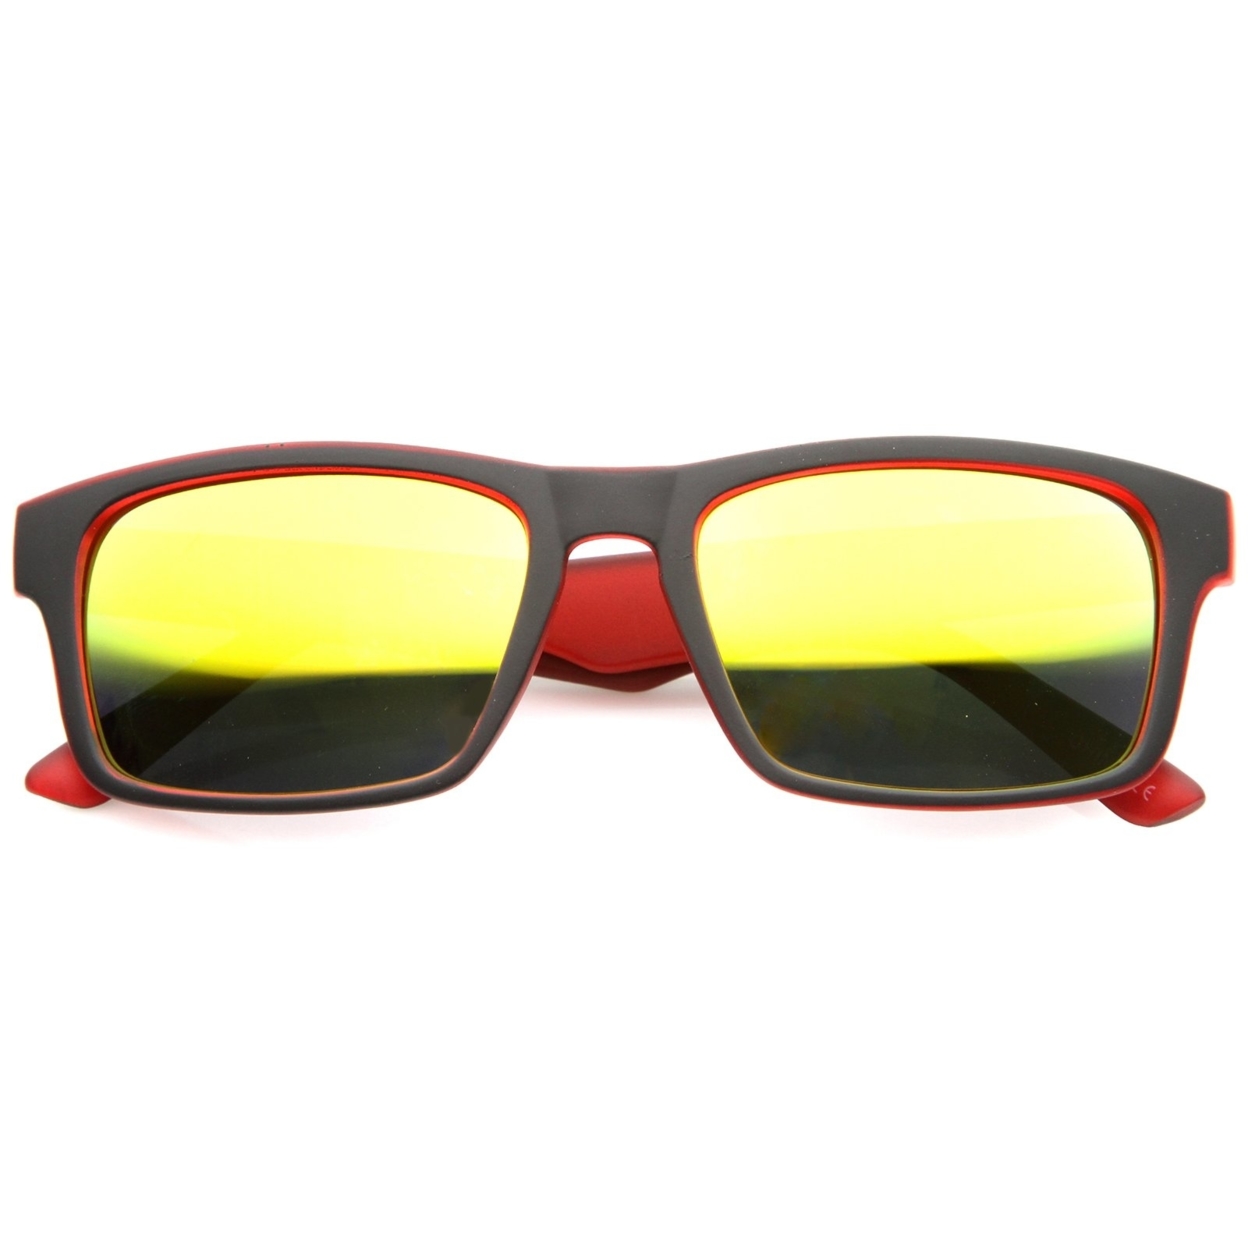 Mens Sport Sunglasses With UV400 Protected Mirrored Lens - Black-Red / Sun